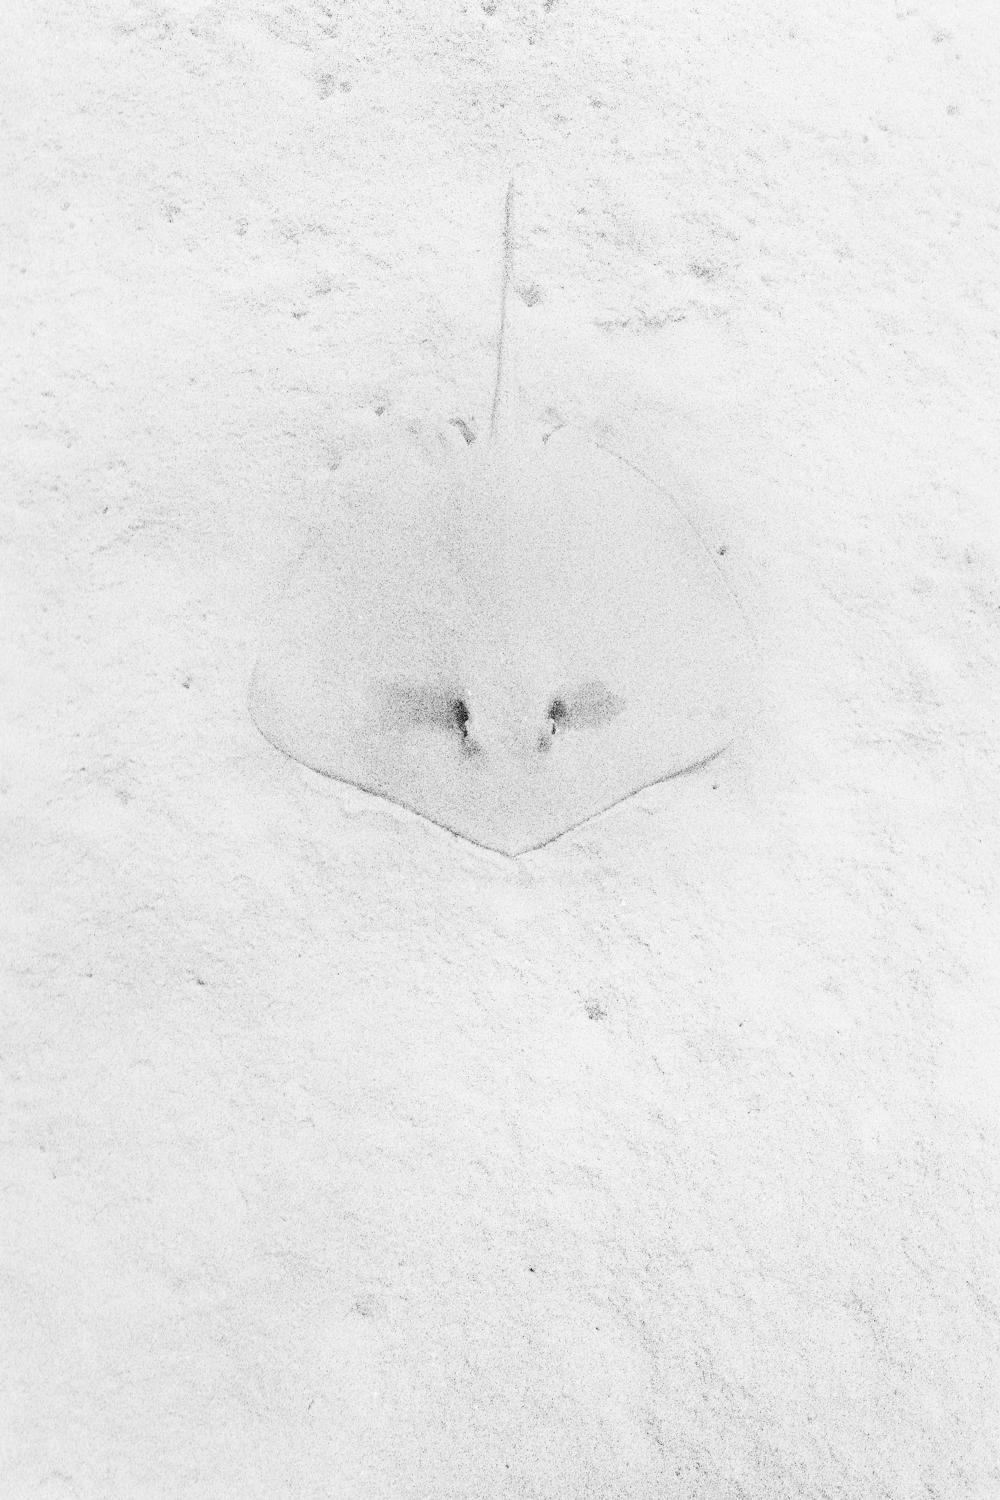 This discrete Ray was pictured by Trent Parke in Coral Bay, Australia, in 2003